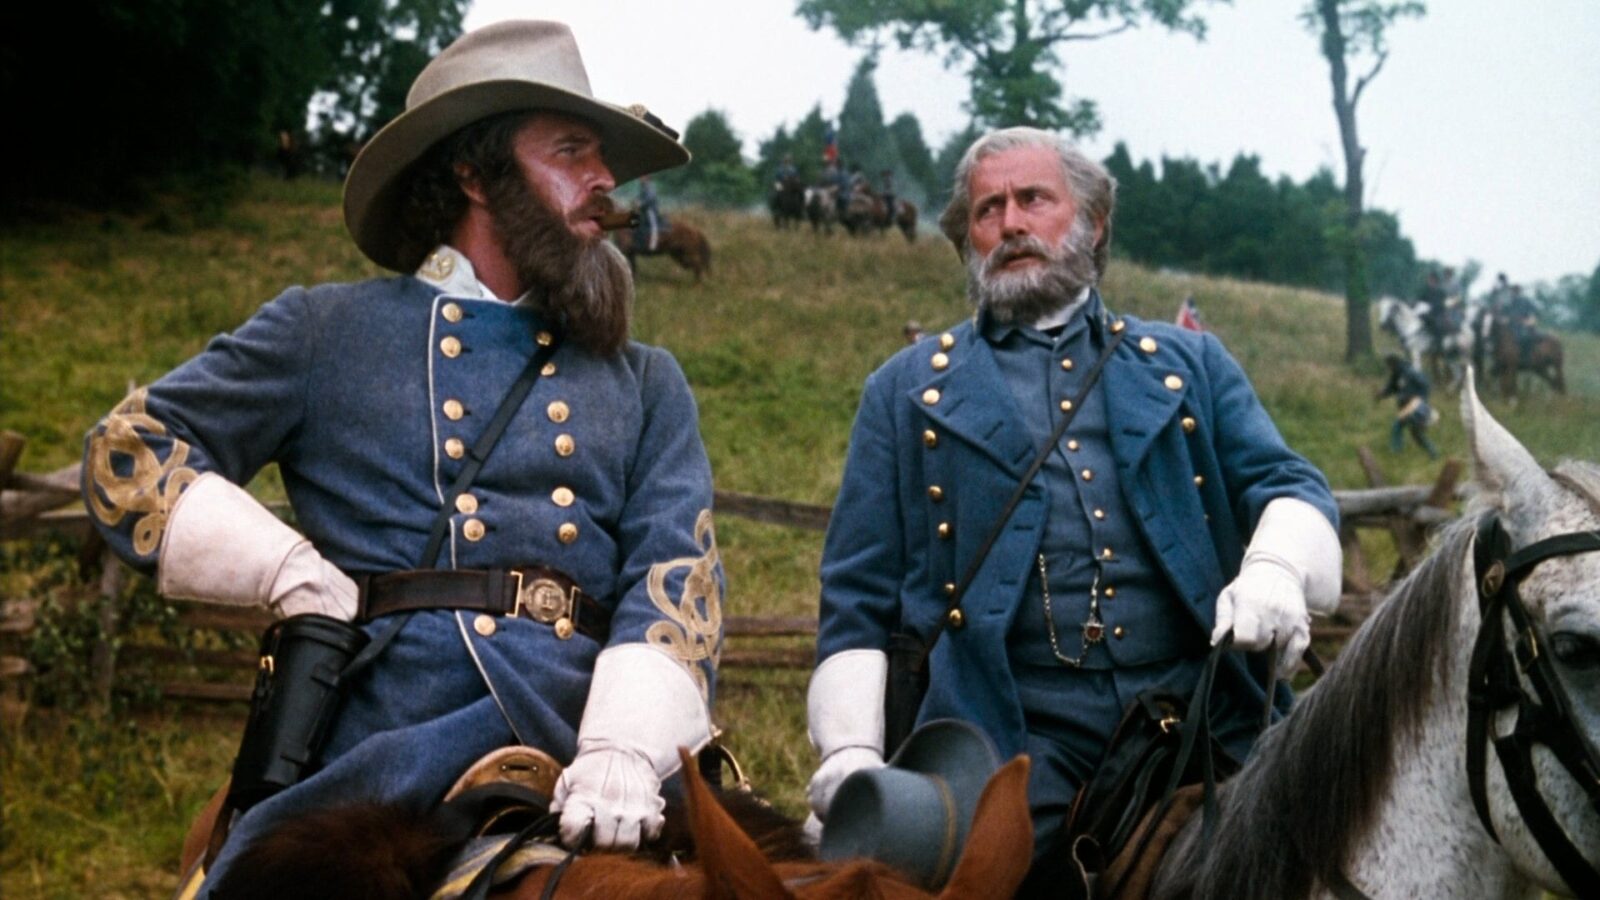 Image from the movie "Gettysburg"